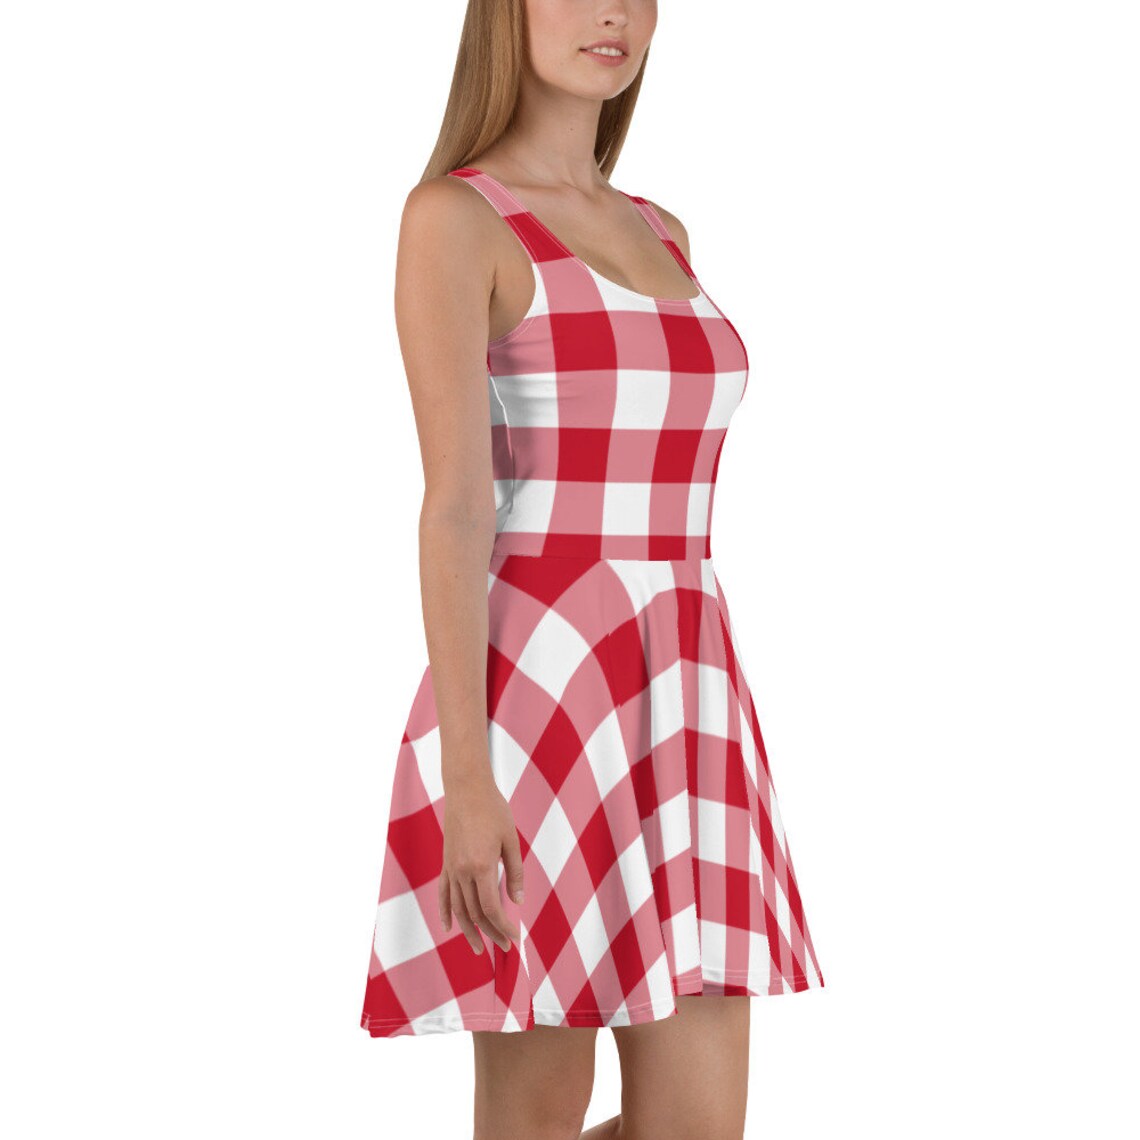 Red Plaid Dress Red White Plaid Dress For Women Aesthetic Etsy